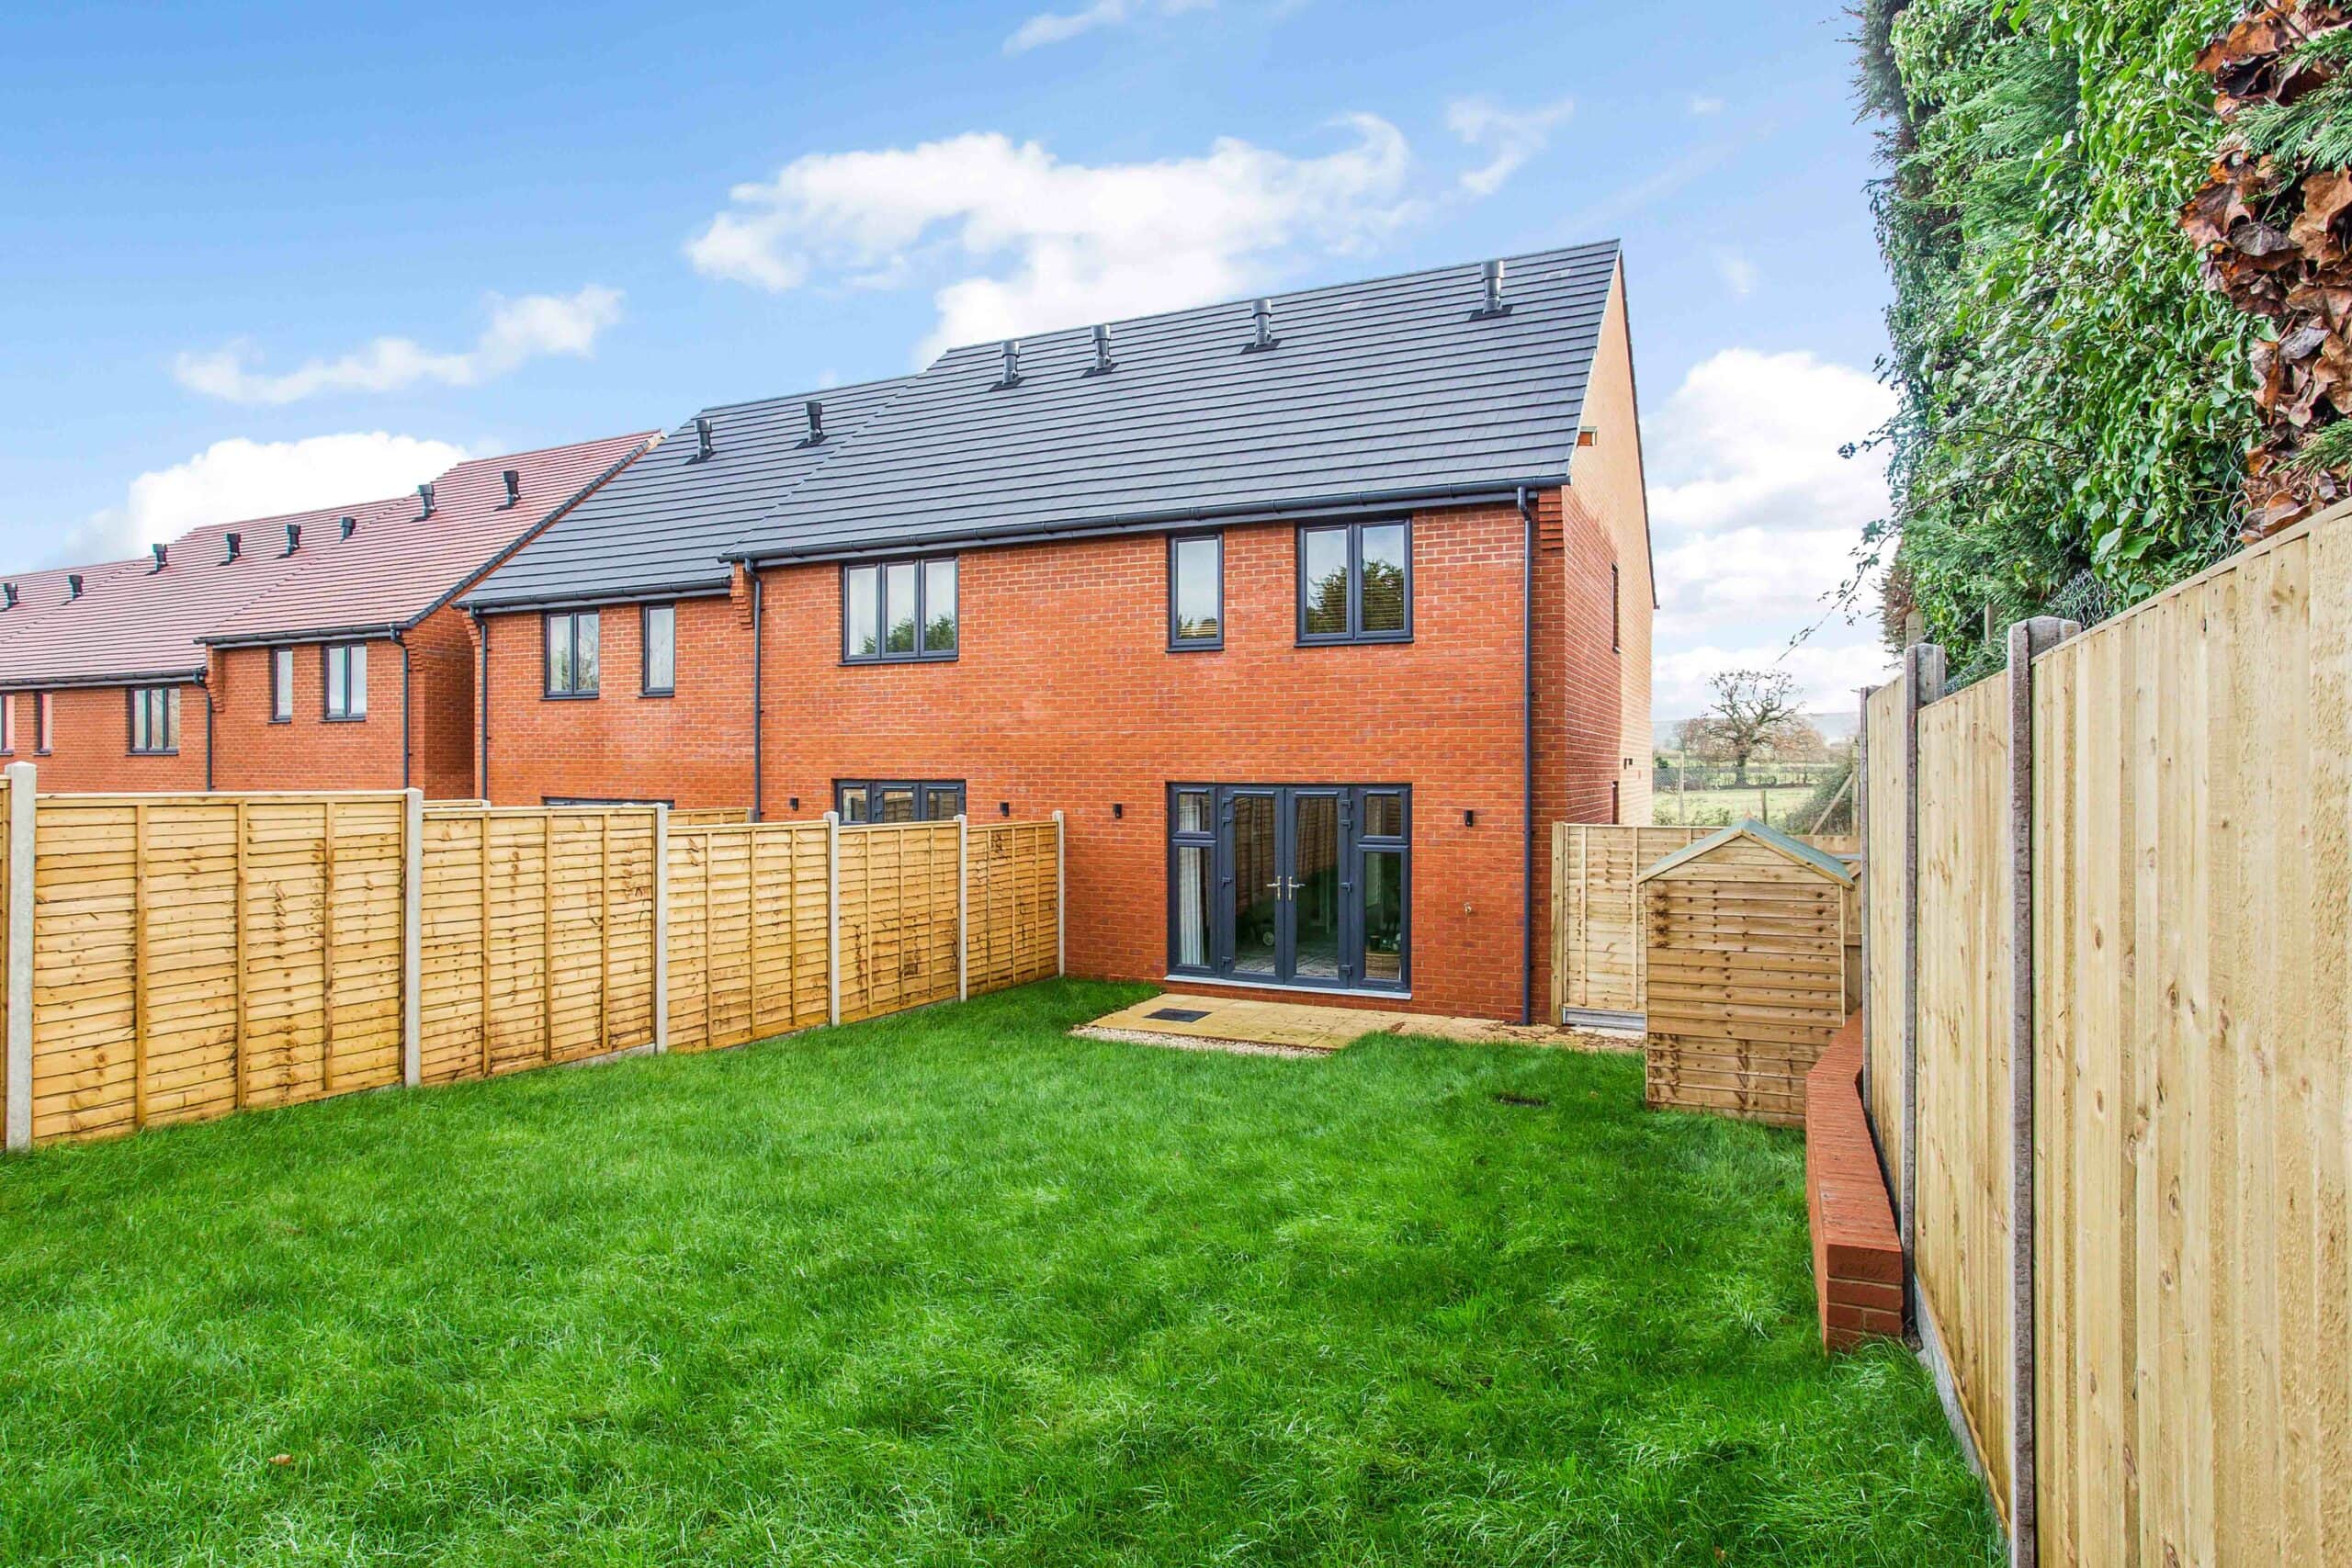 An image of a garden at Violet Cross by Abri Homes - available to purchase through Shared Ownership on Share to Buy!